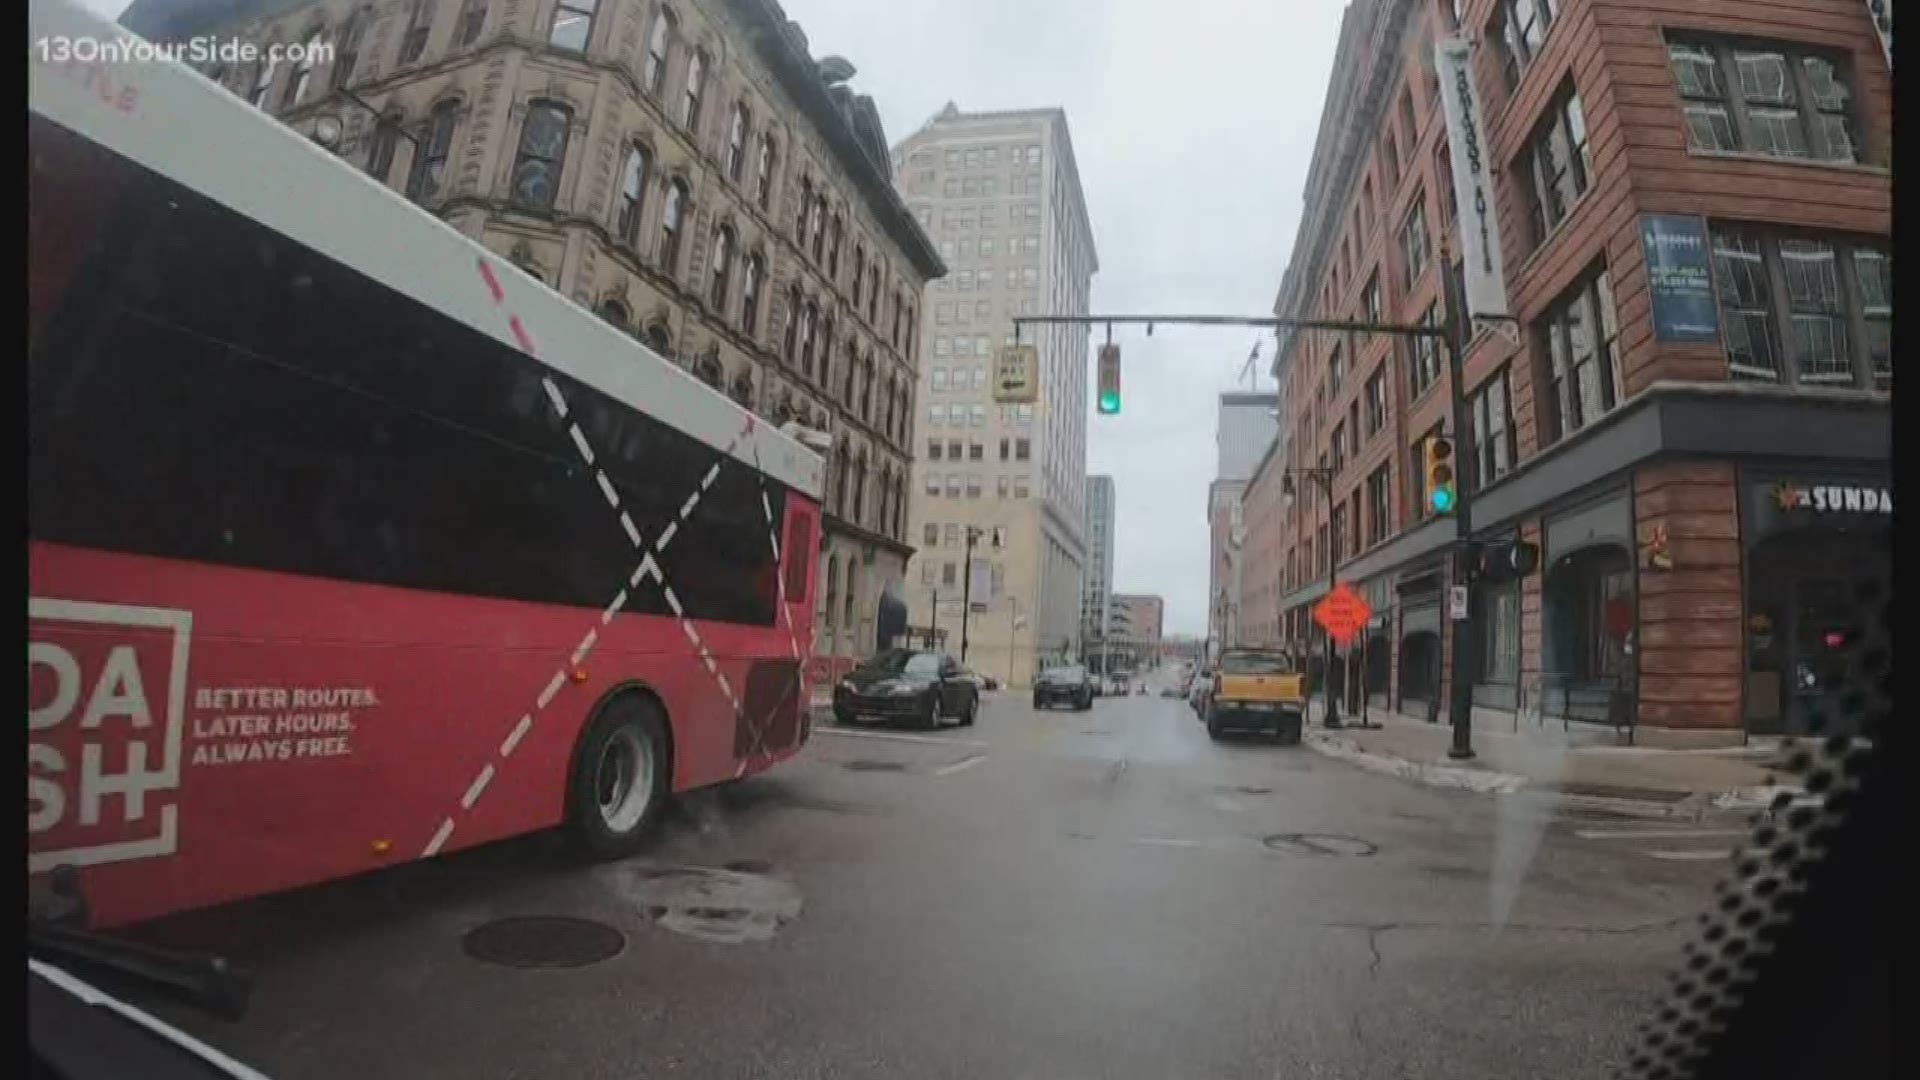 About 6 months ago, the city of Grand Rapids starting testing driverless shuttles.